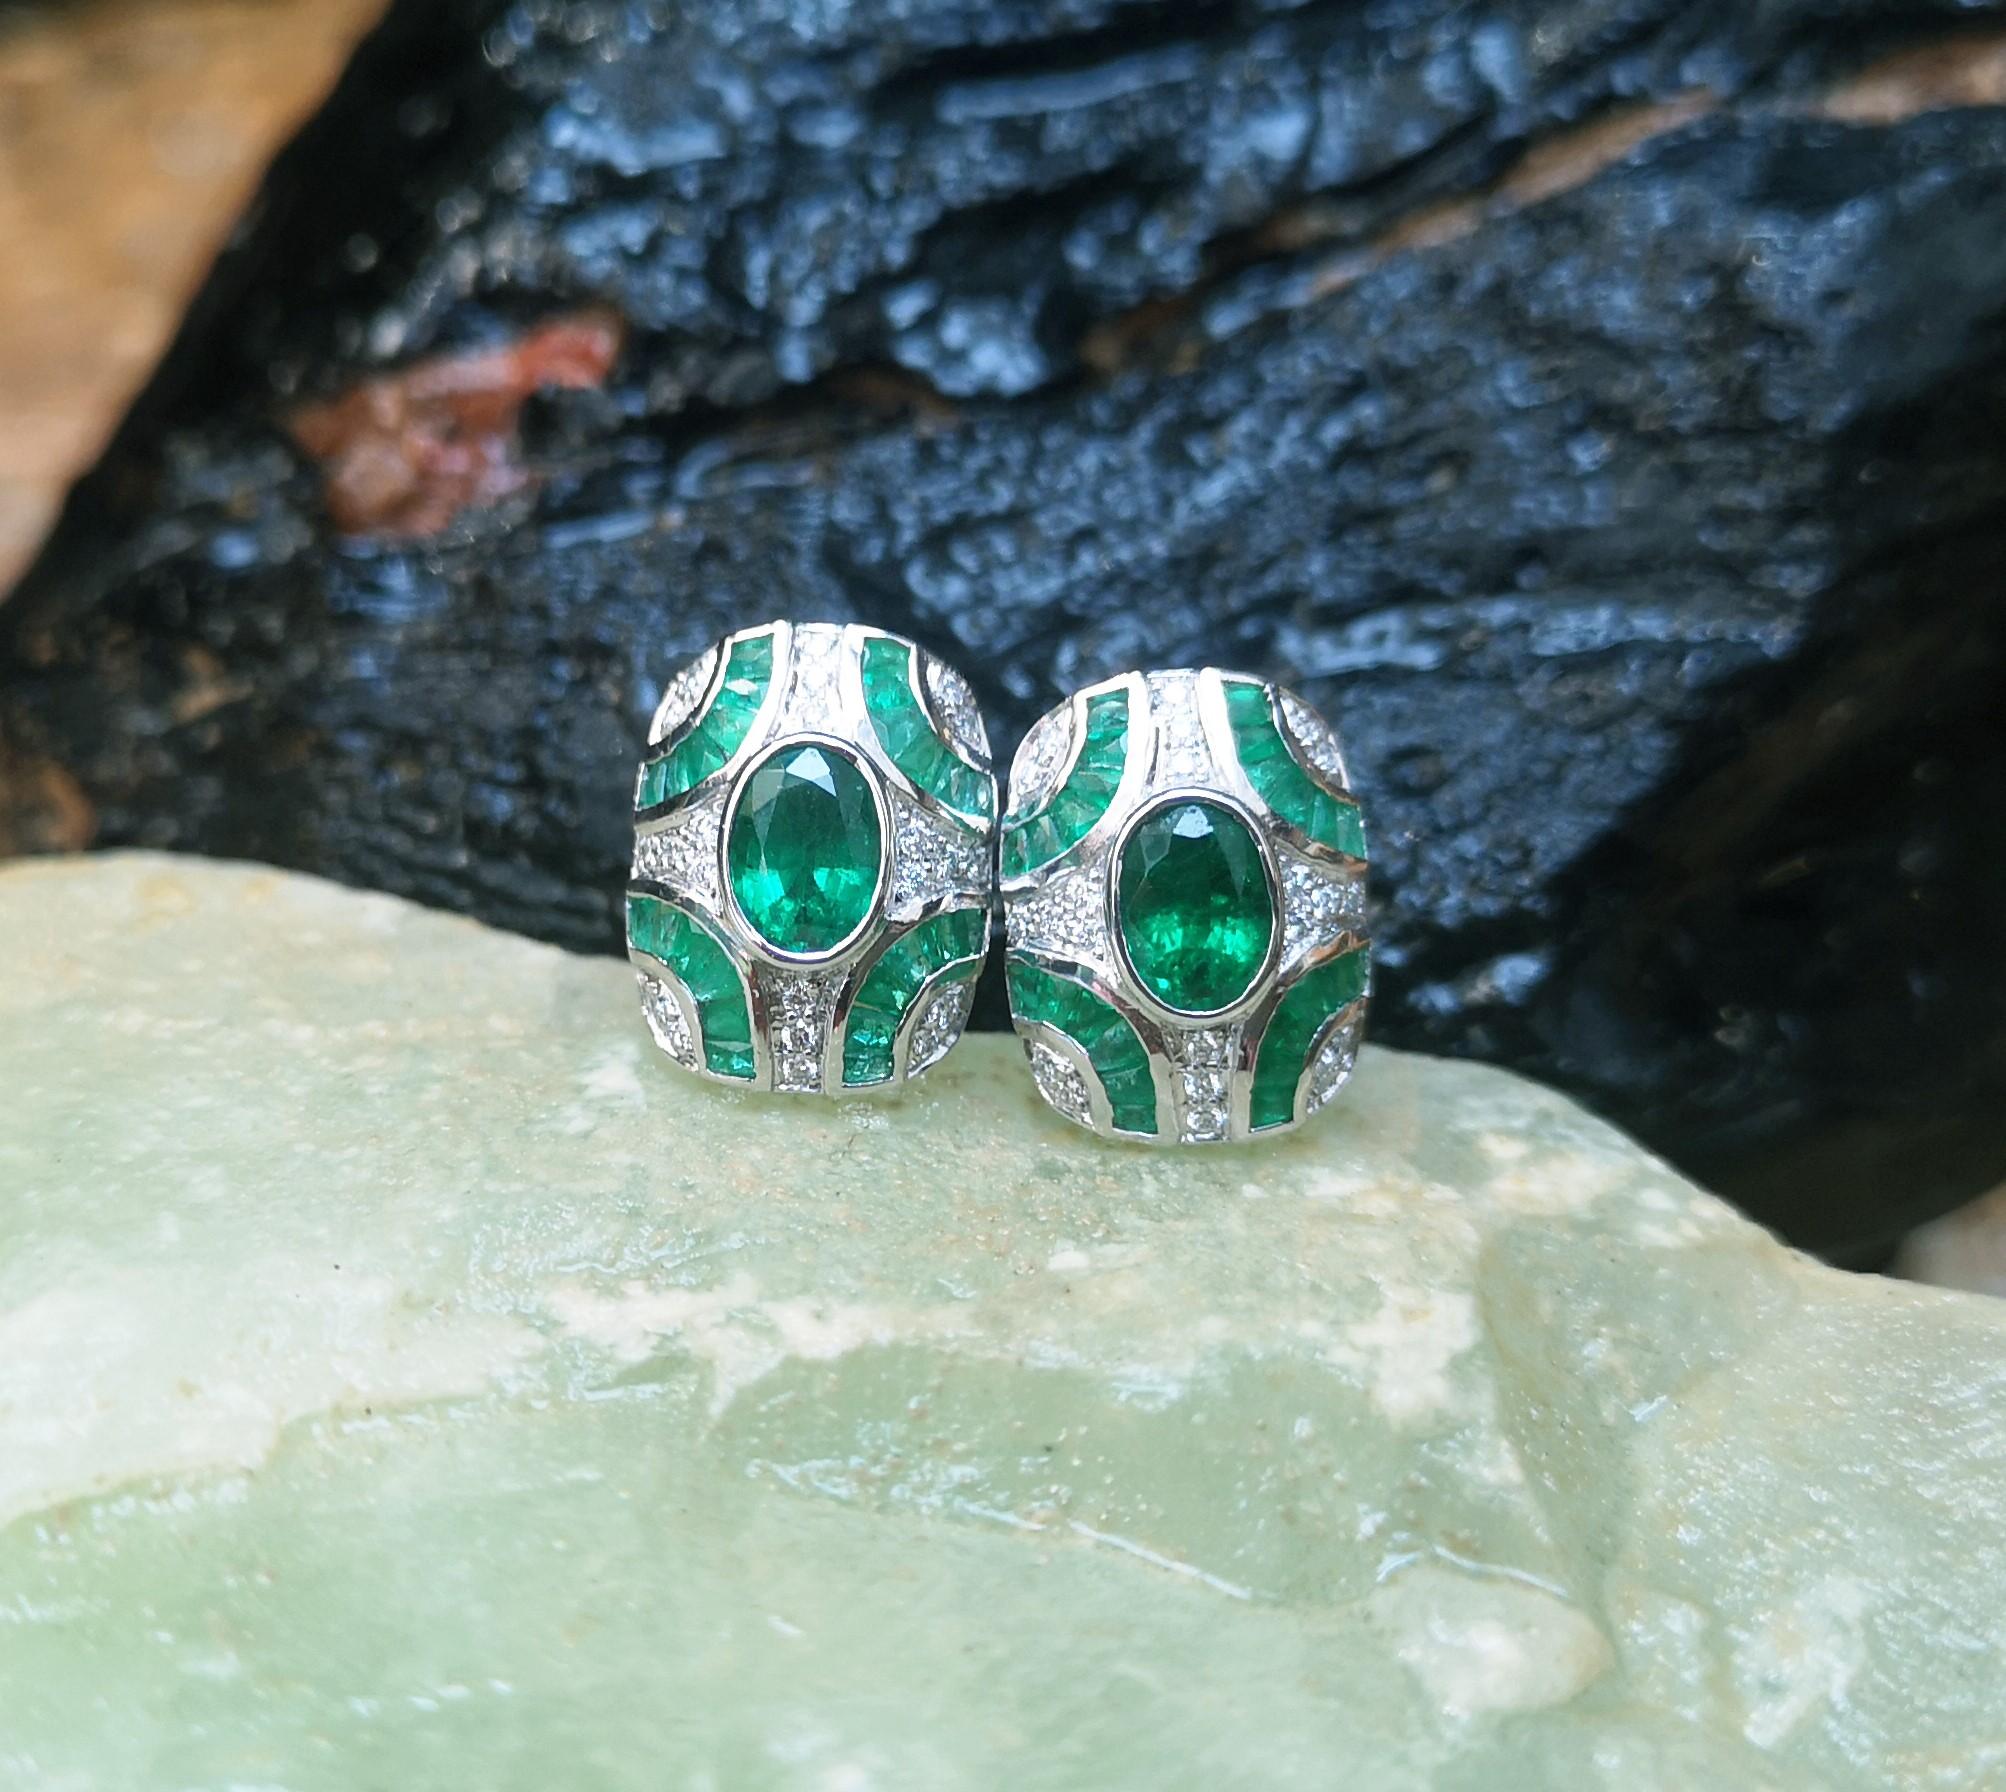 Emerald 1.65 carats with Emerald 2.37 carats and Diamond 0.26 carats Earrings set in 18 Karat White Gold Settings

Width: 1.2 cm
Length: 1.6 cm 

